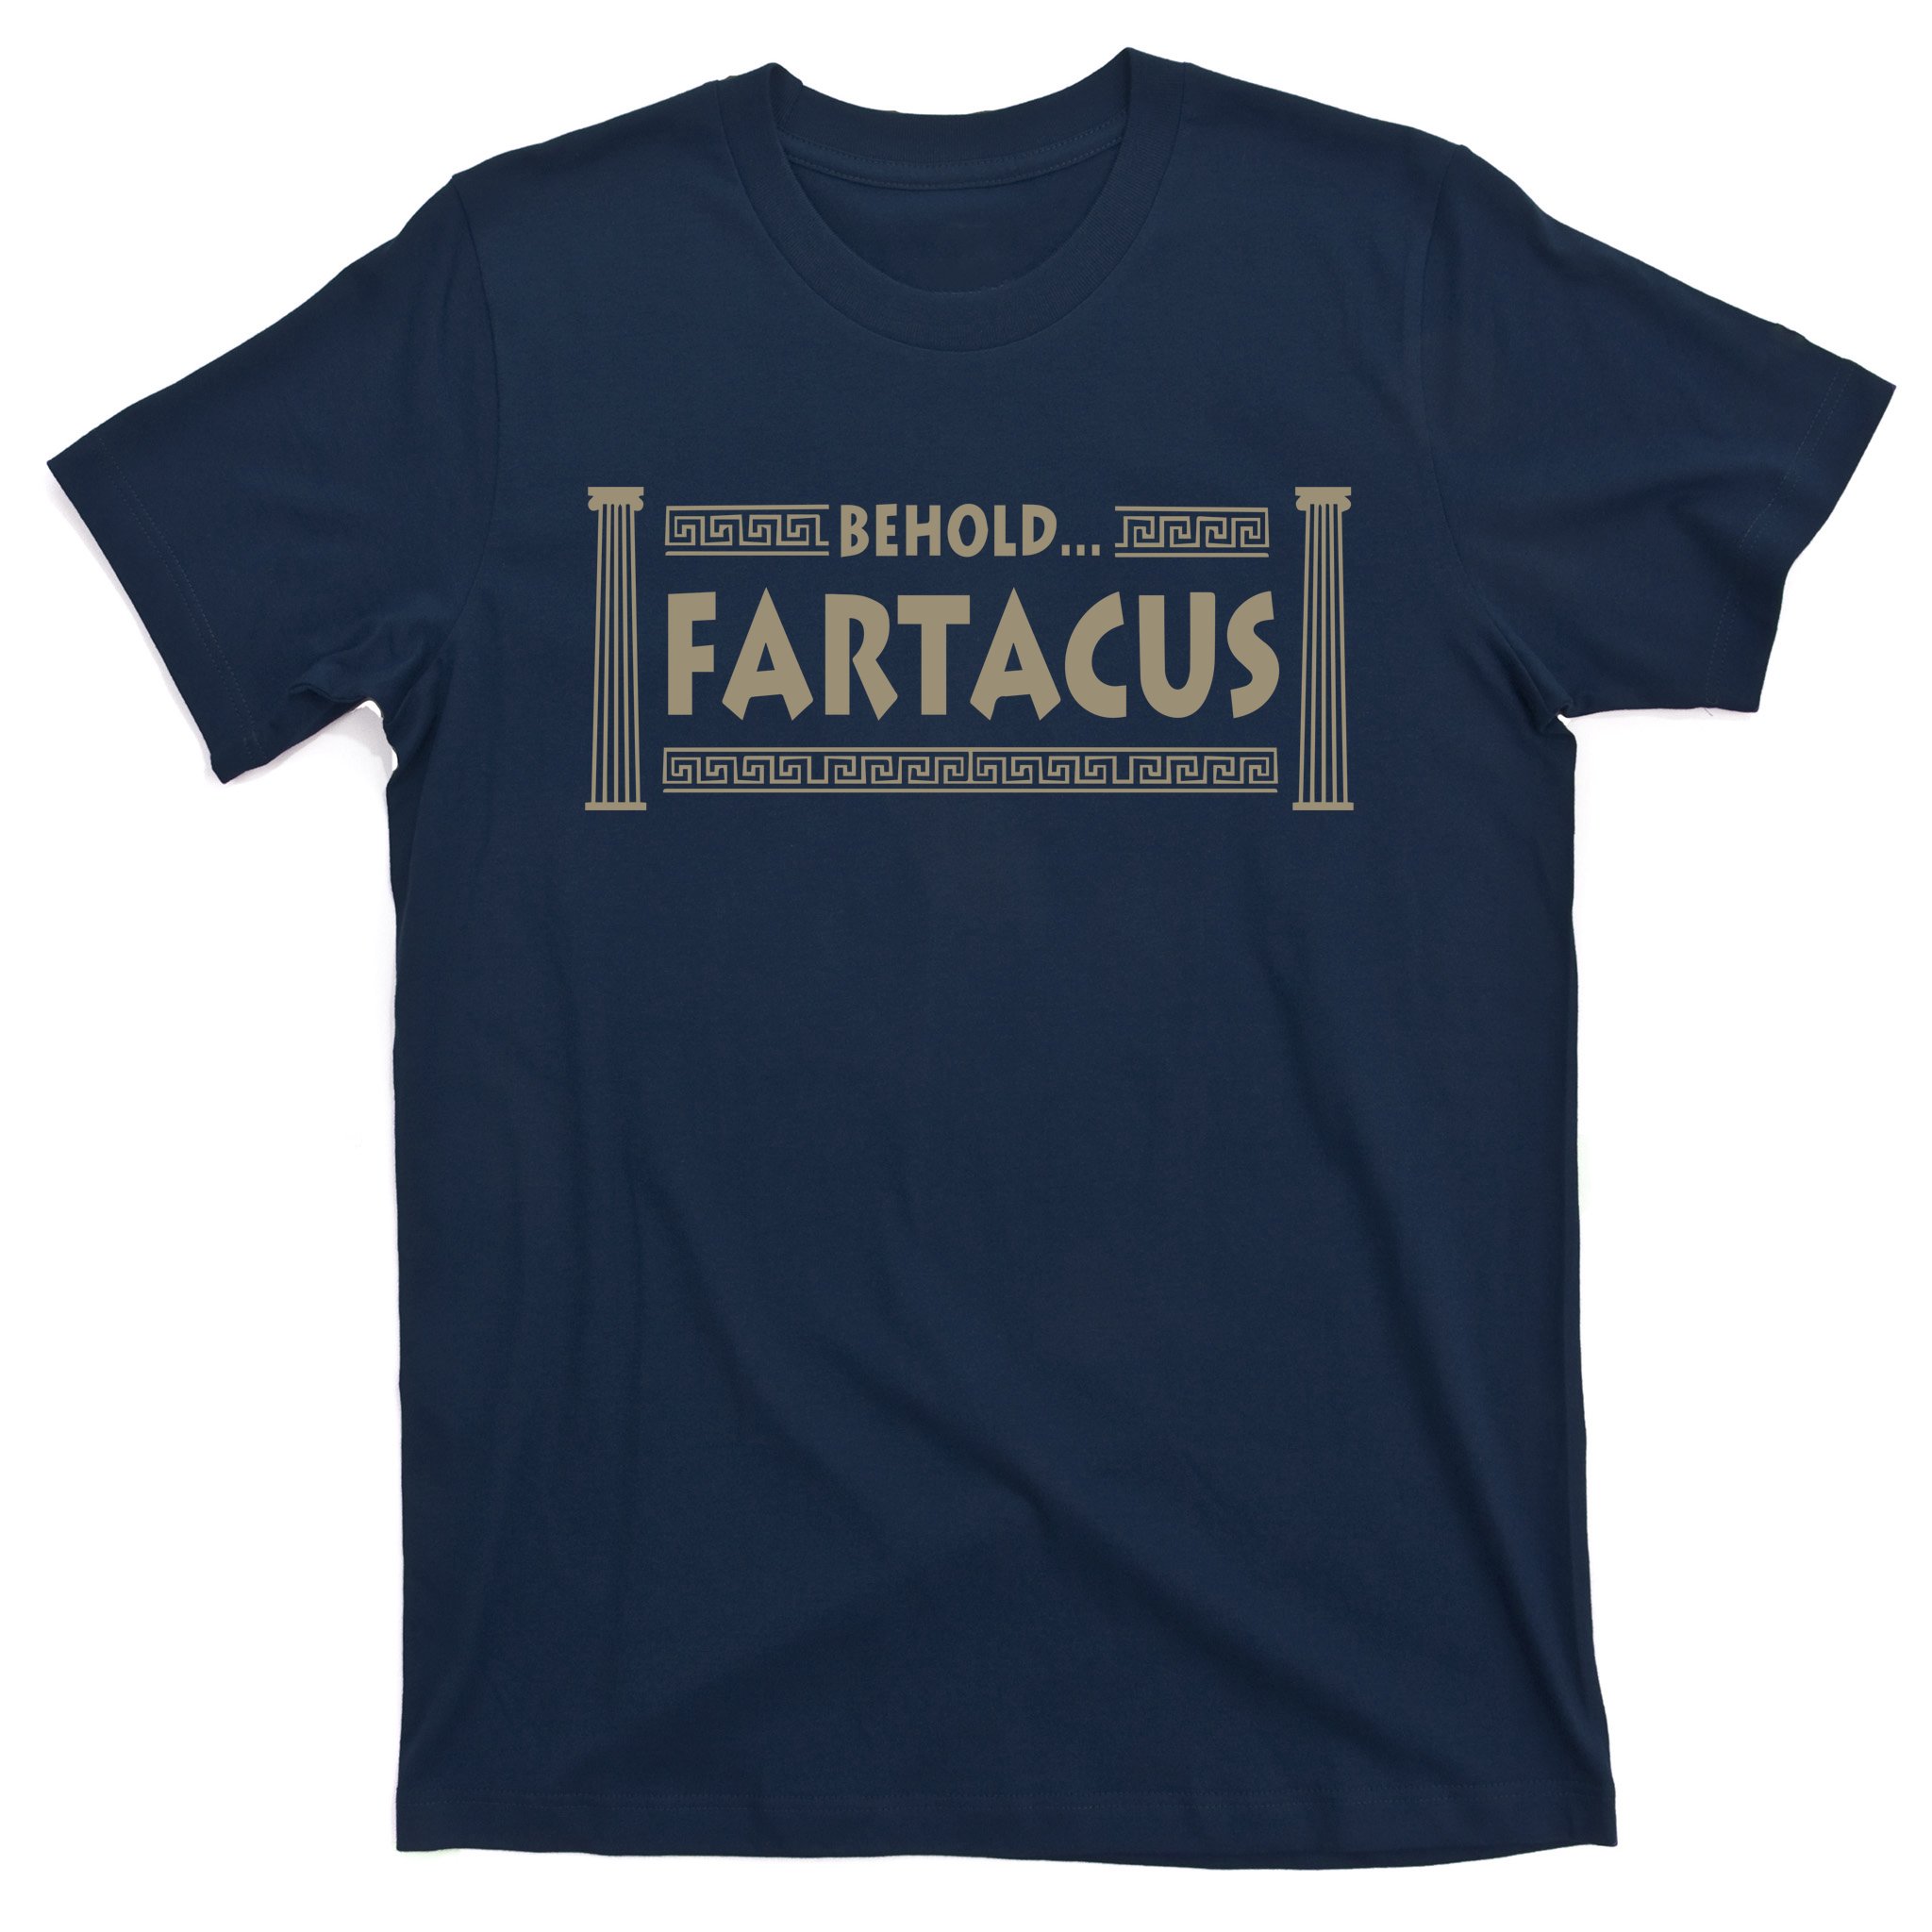 BEHOLD FARTACUS Fart Farting Humorous Adult T-Shirt All Sizes 